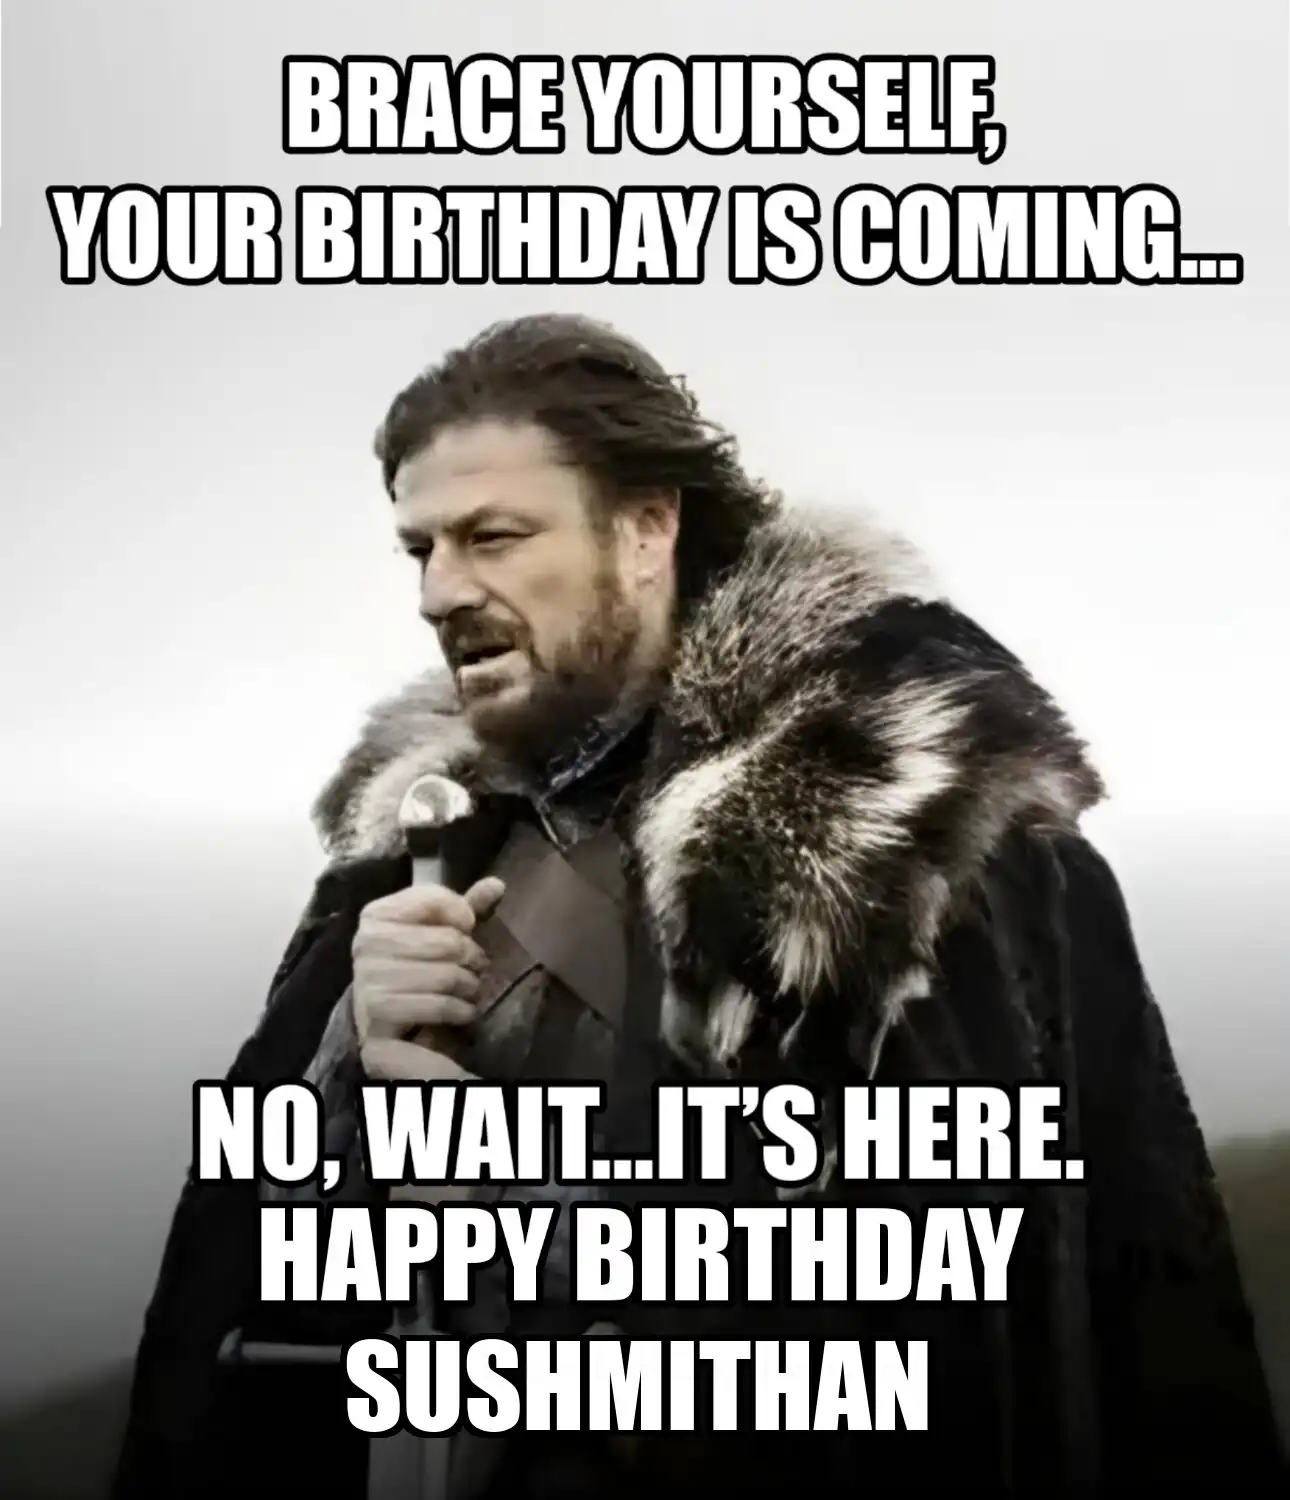 Happy Birthday Sushmithan Brace Yourself Your Birthday Is Coming Meme